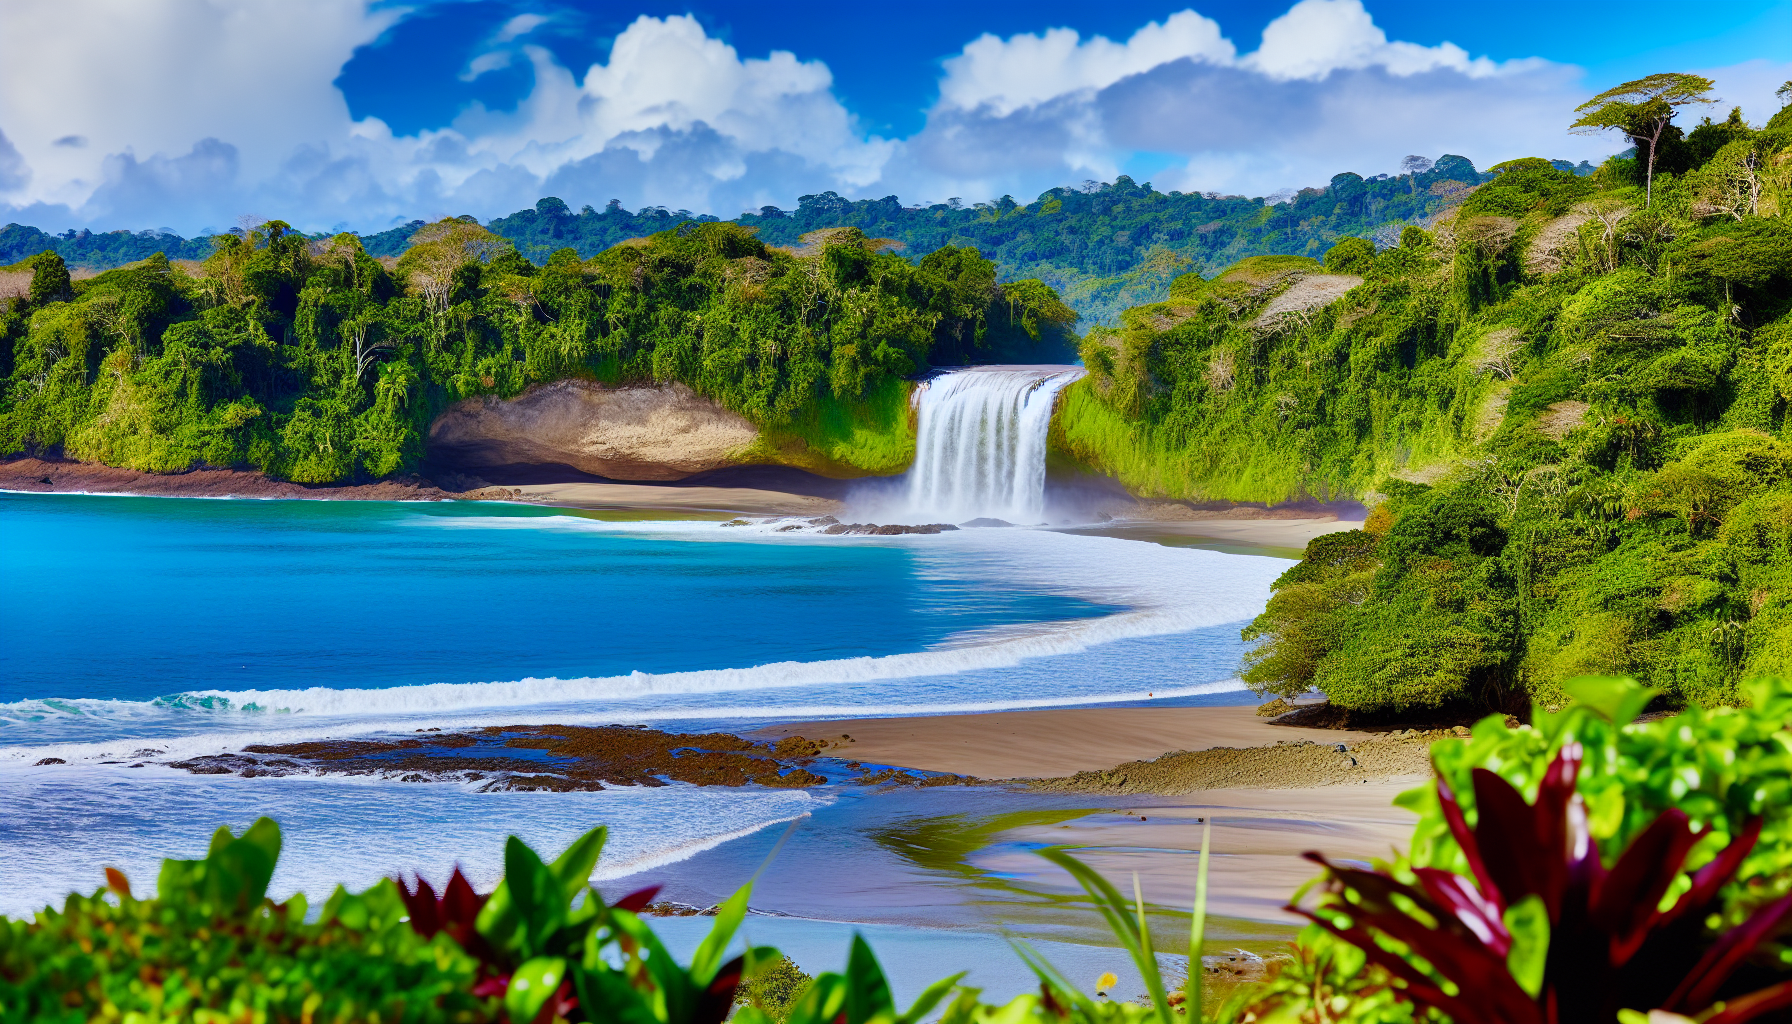 Secluded Playa Cocalito with a waterfall cascading into the ocean